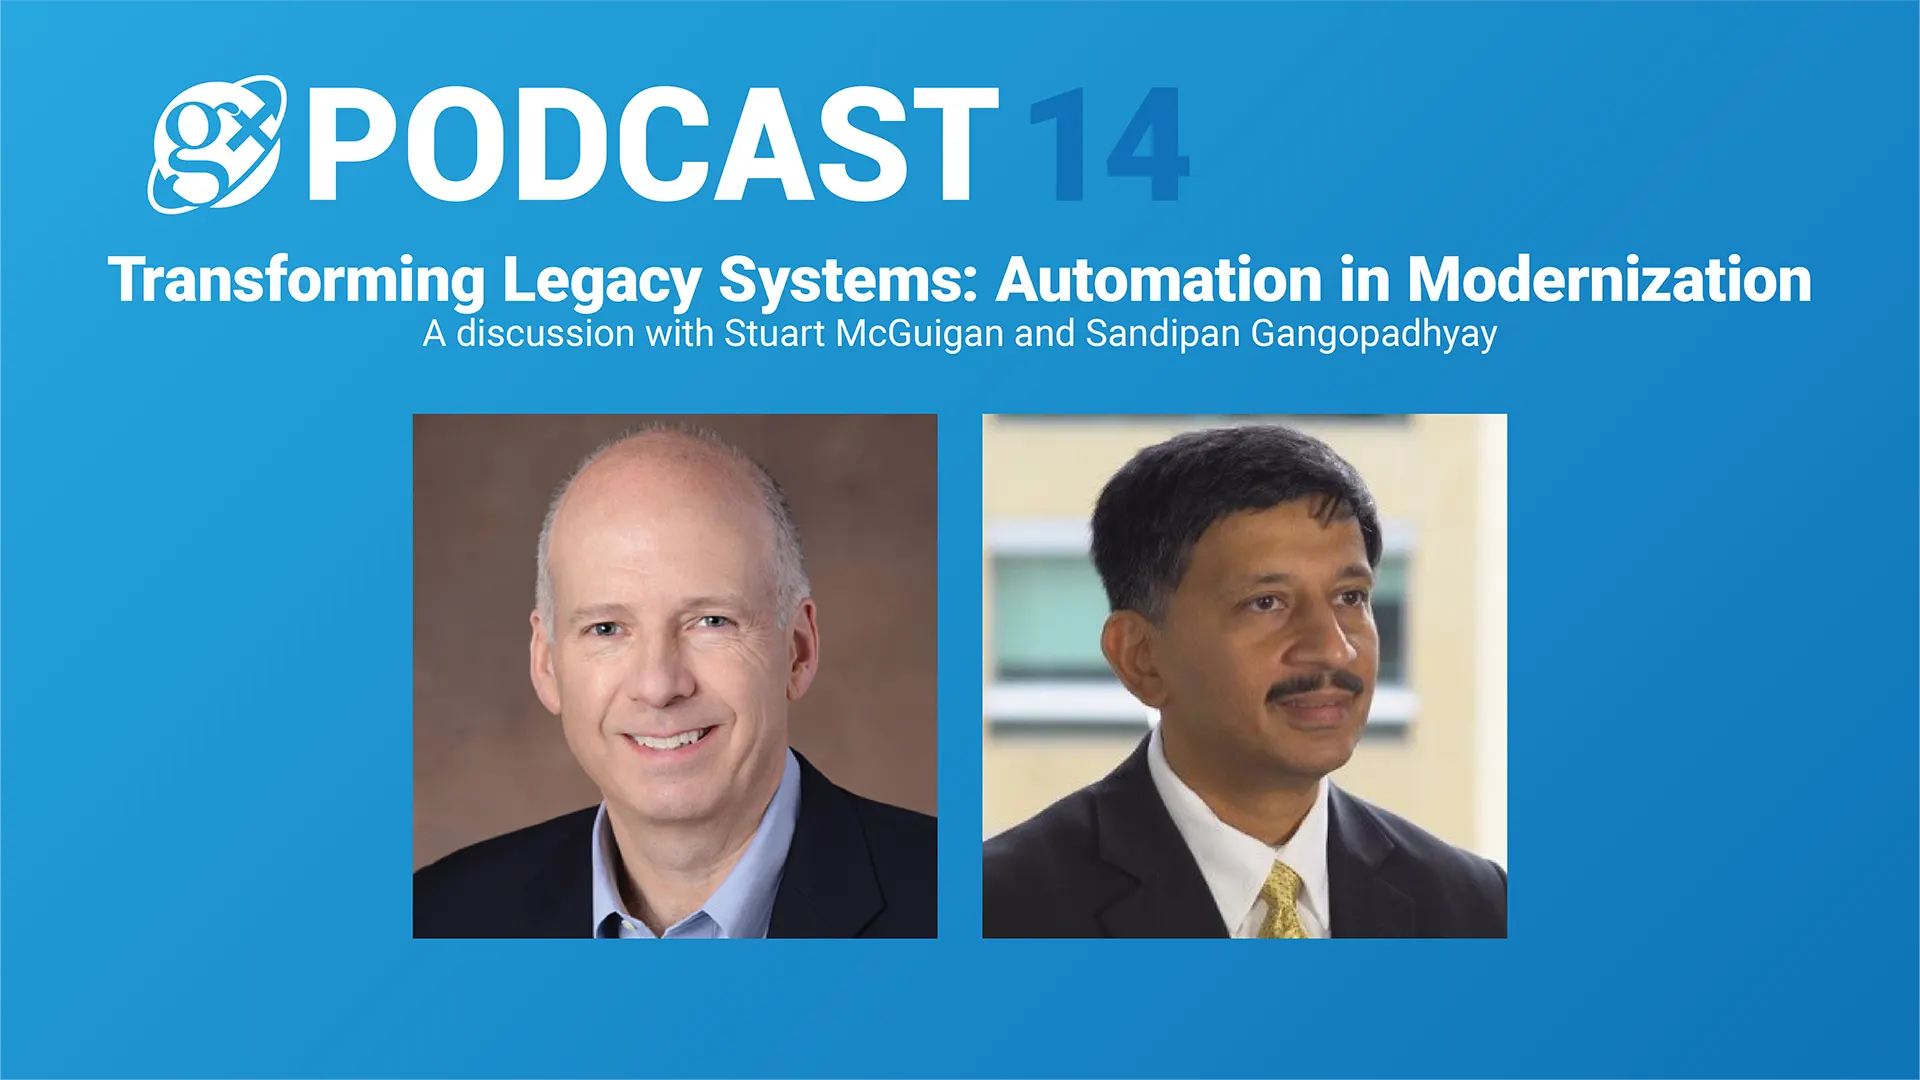 Gx Podcast 14: Transforming Legacy Systems: Automation in Modernization